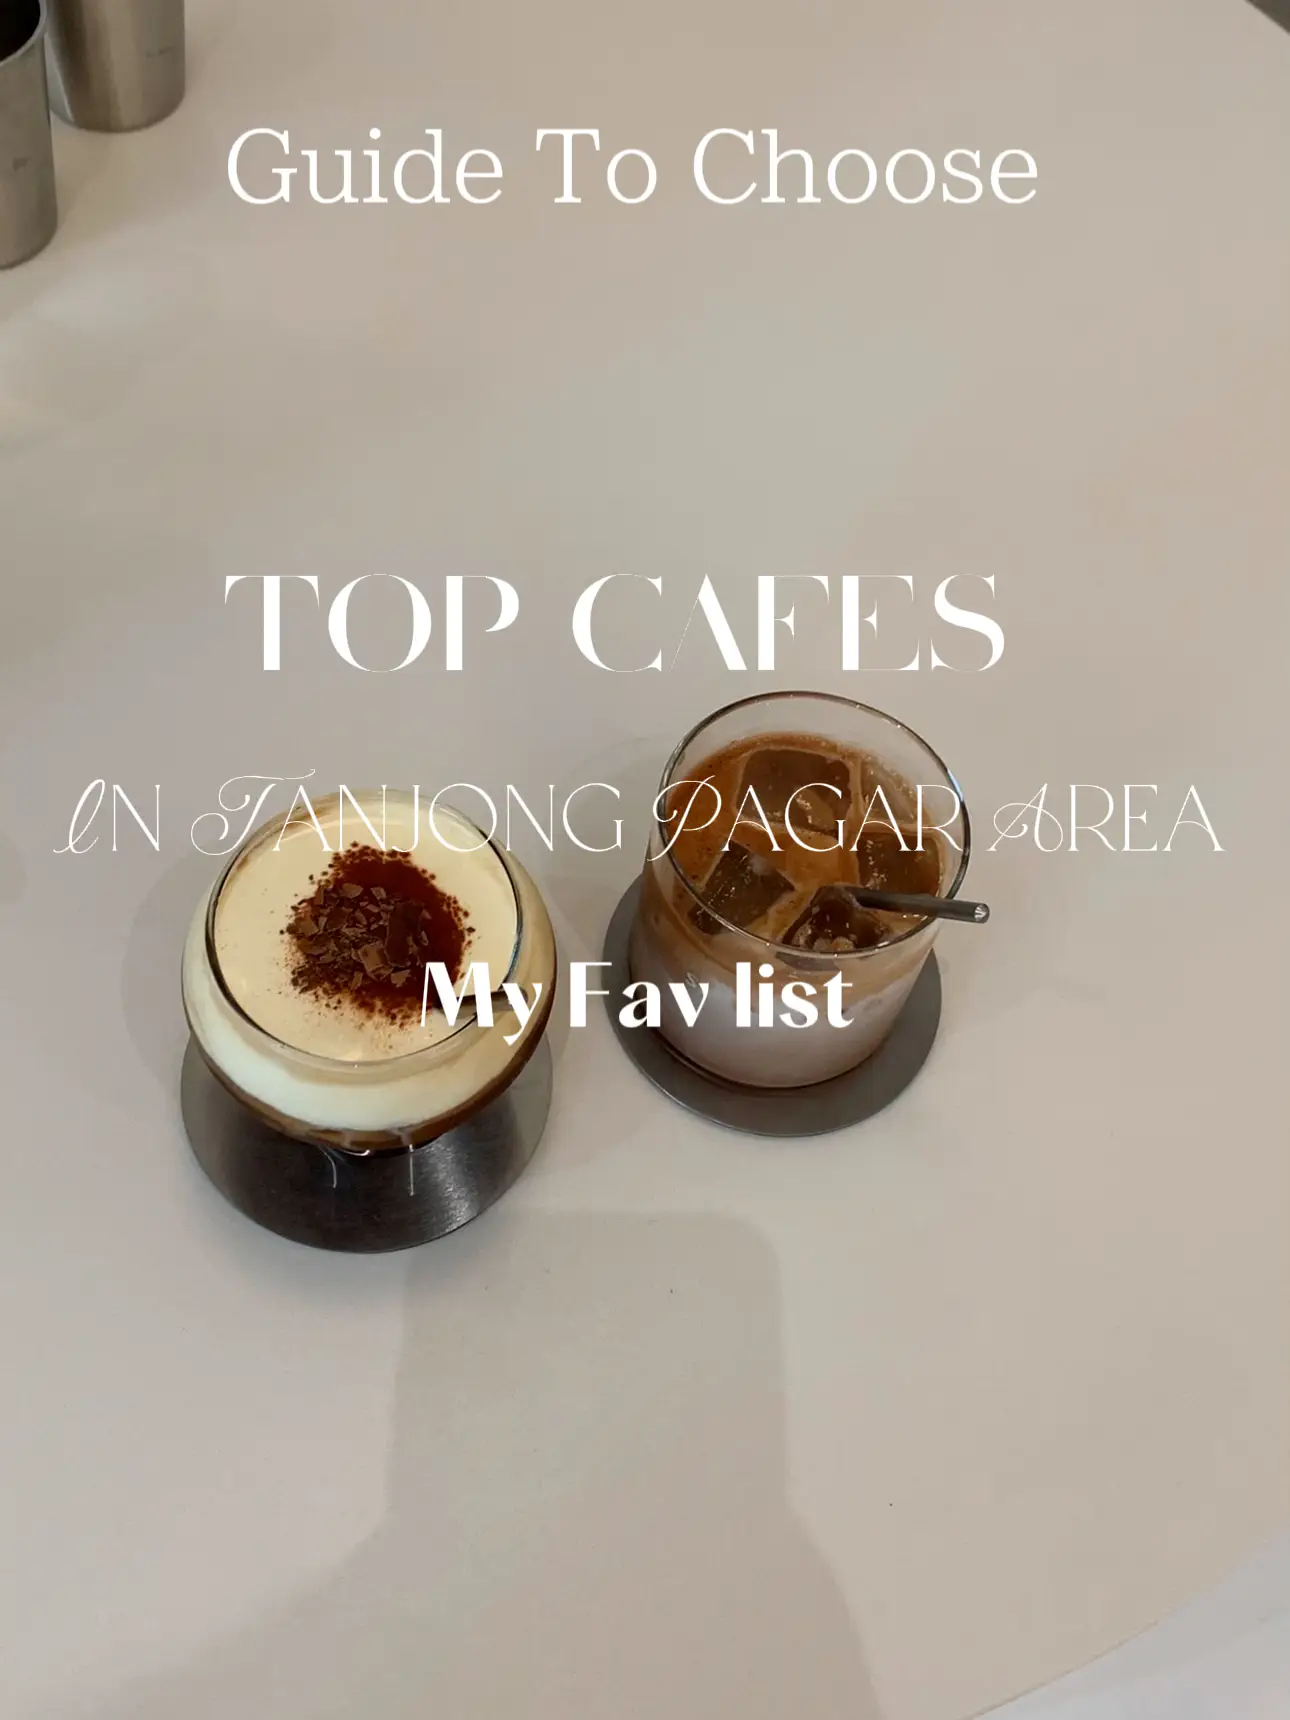 GUIDE TO CHOOSE - TOP CAFE IN TANJONG PAGAR  AREA 's images